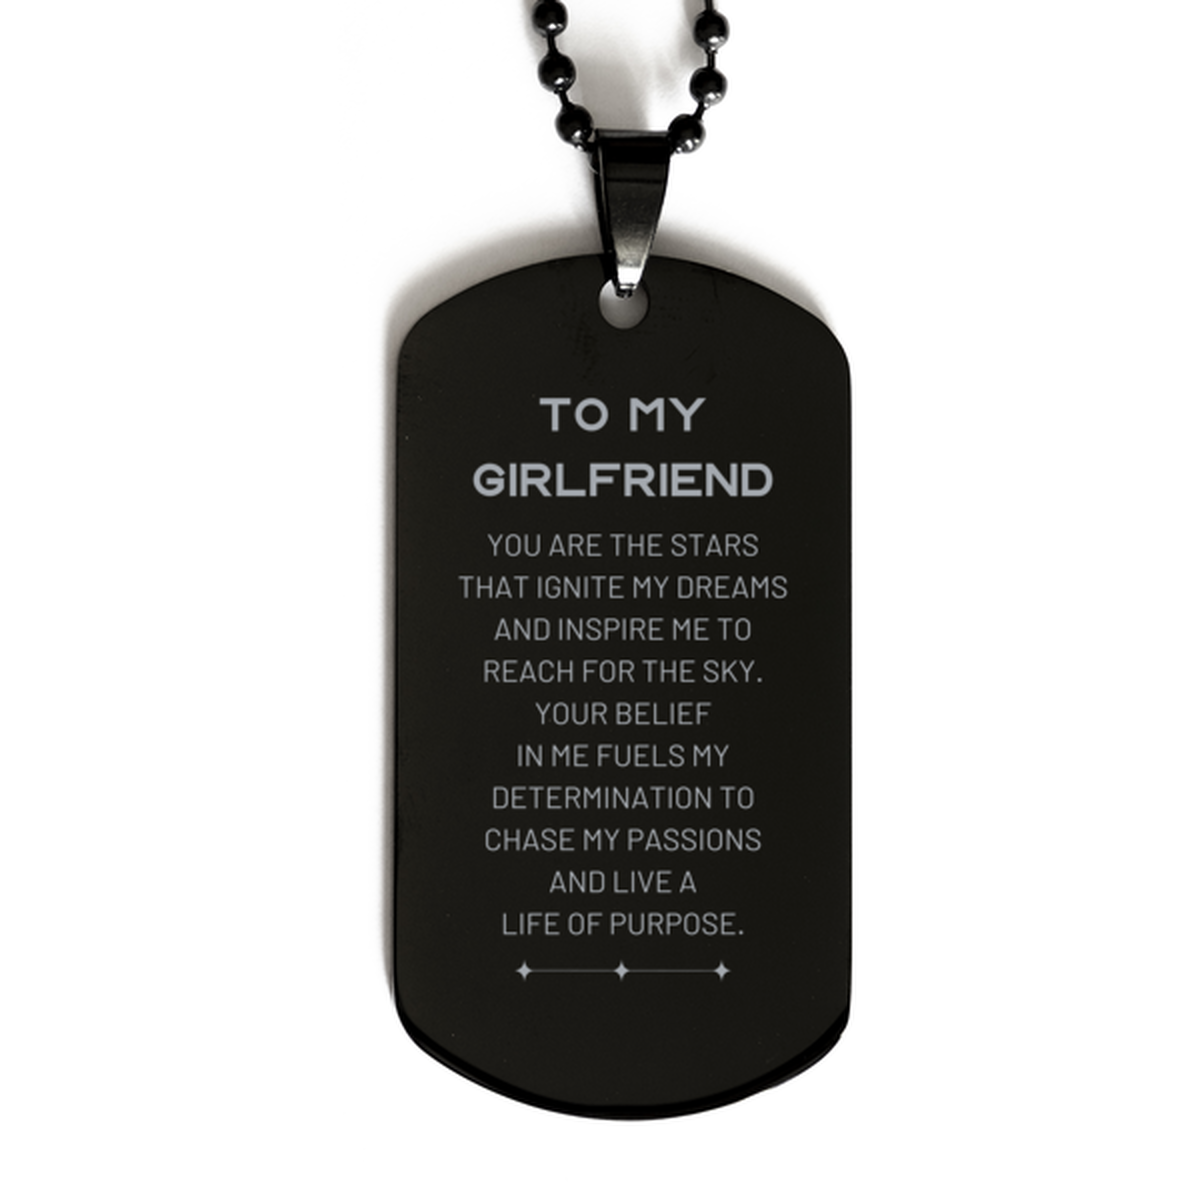 To My Girlfriend Black Dog Tag, You are the stars that ignite my dreams and inspire me to reach for the sky, Birthday Unique Gifts For Girlfriend, Thank You Gifts For Girlfriend